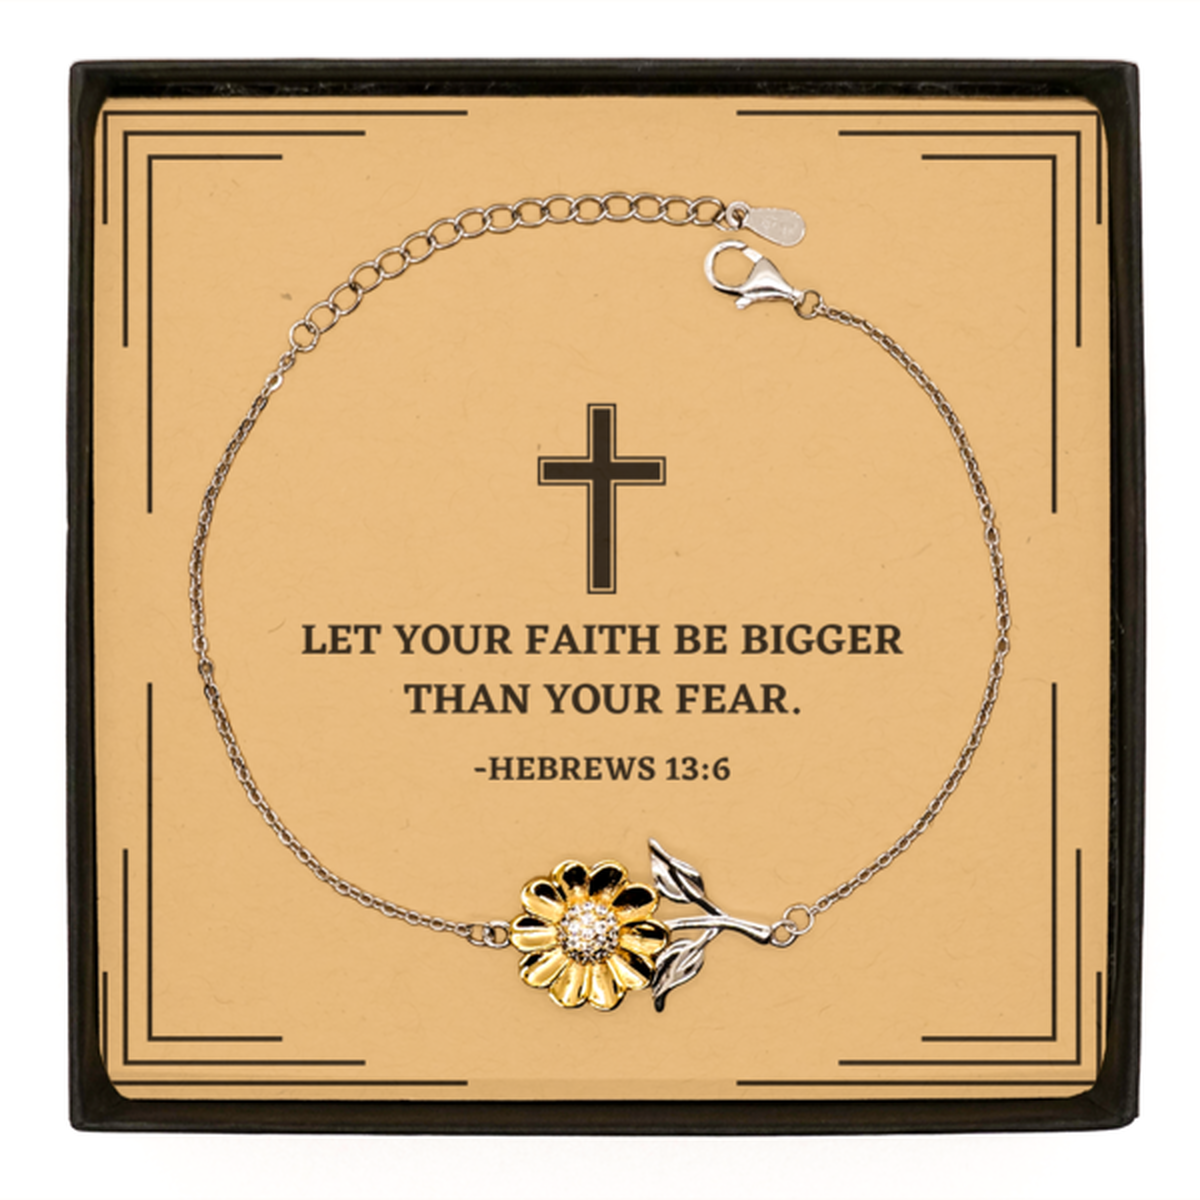 Baptism Gifts For Teenage Boys Girls, Christian Bible Verse Sterling Silver Sunflower Bracelet, Let your faith be bigger than your fear, Confirmation Gifts, Bible Verse Card for Son, Godson, Grandson